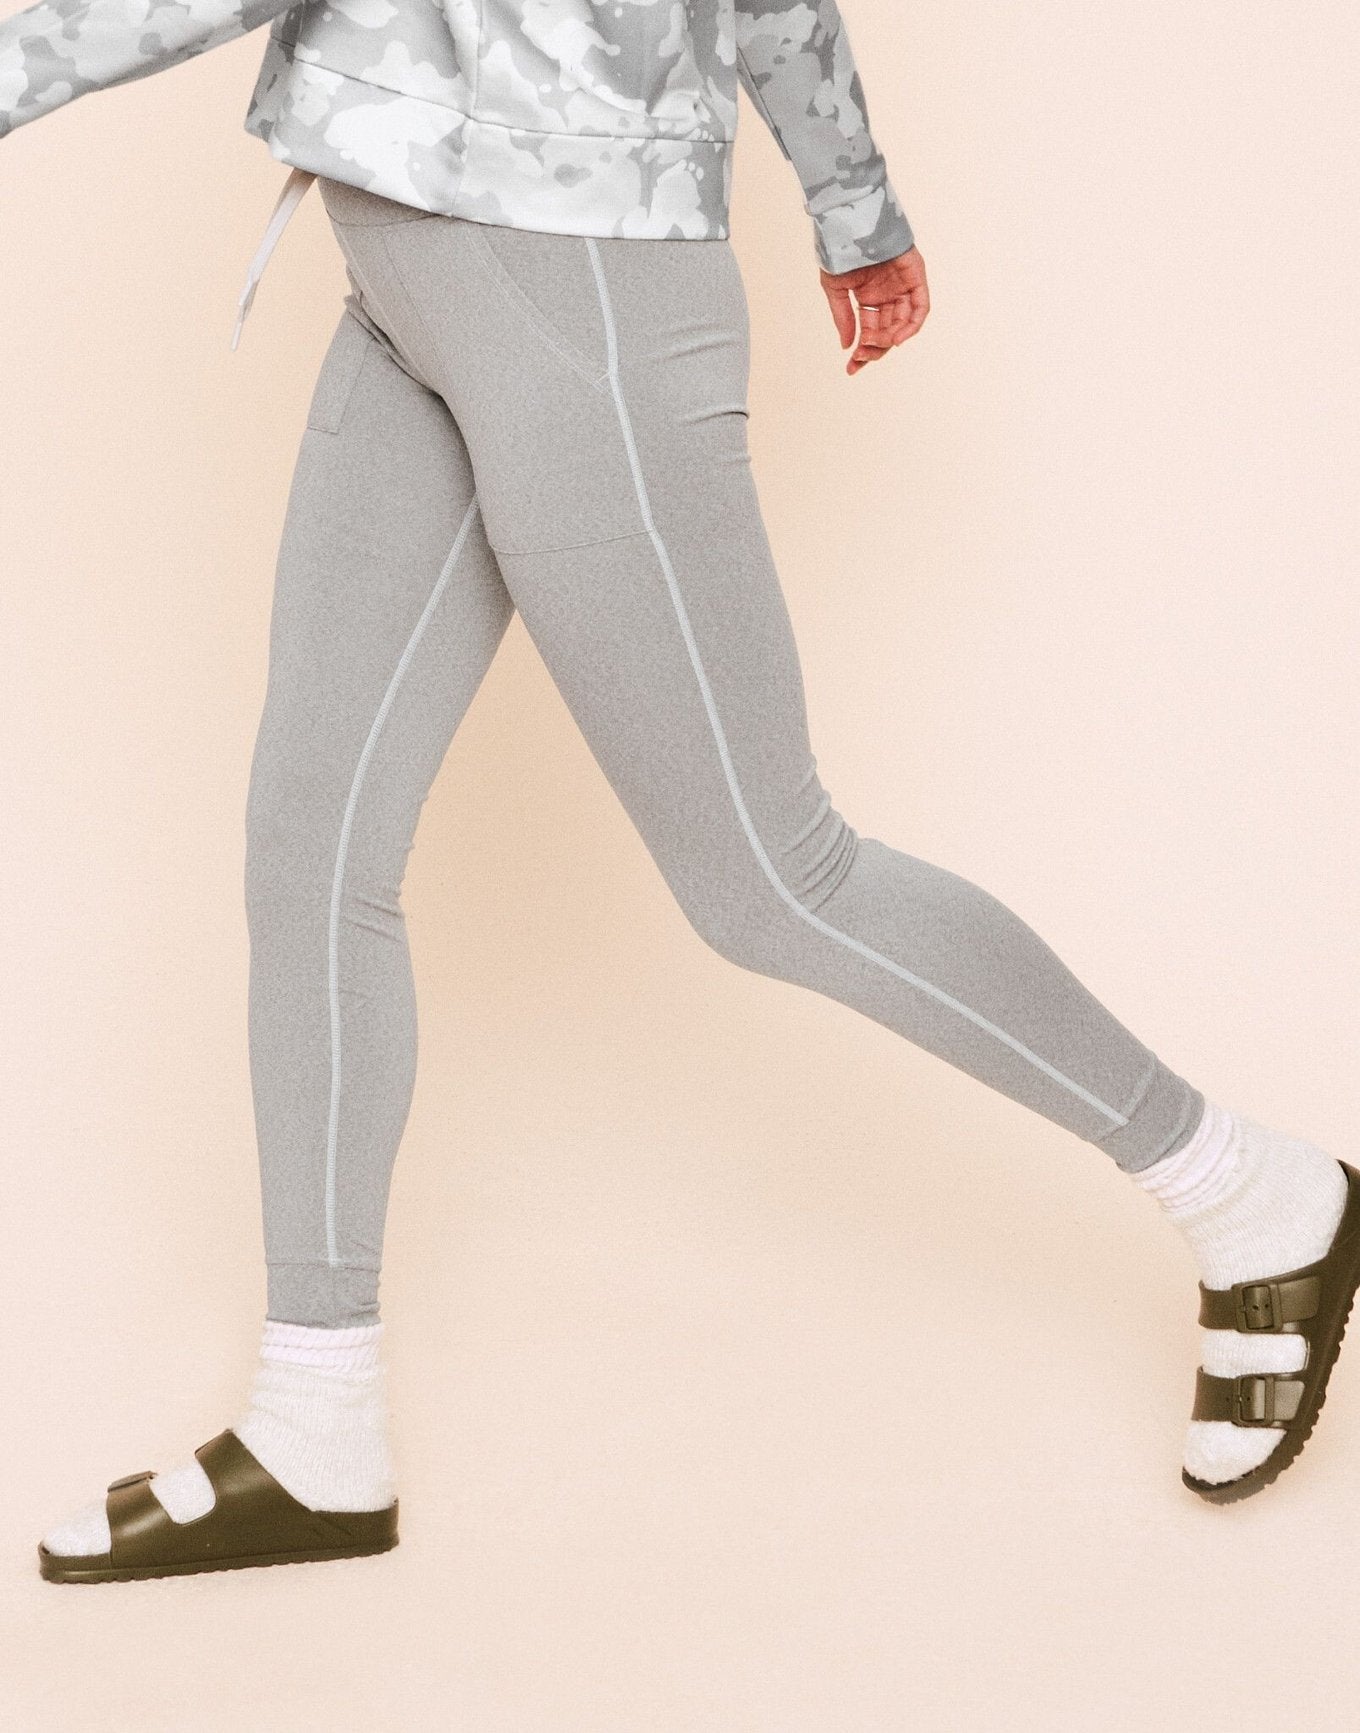 Earth Republic Jenesis Fitted Legging Leggings in color Oyster Mushroom Marl and shape pant